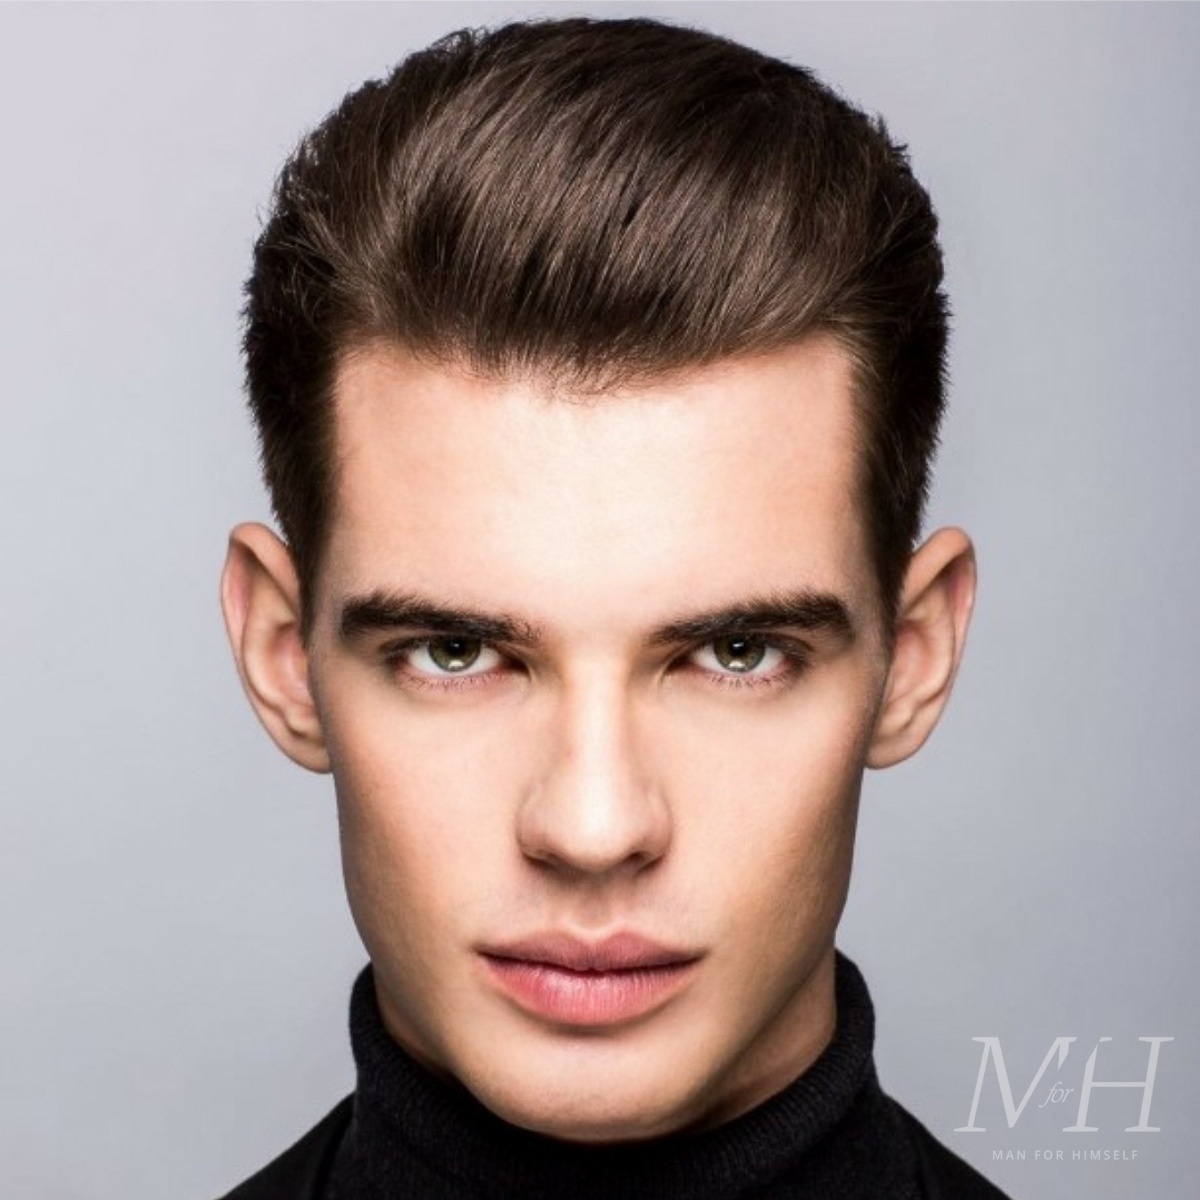 The Perfect Slicked Back Hairstyle Tutorial | Men's Hair 2021 - YouTube